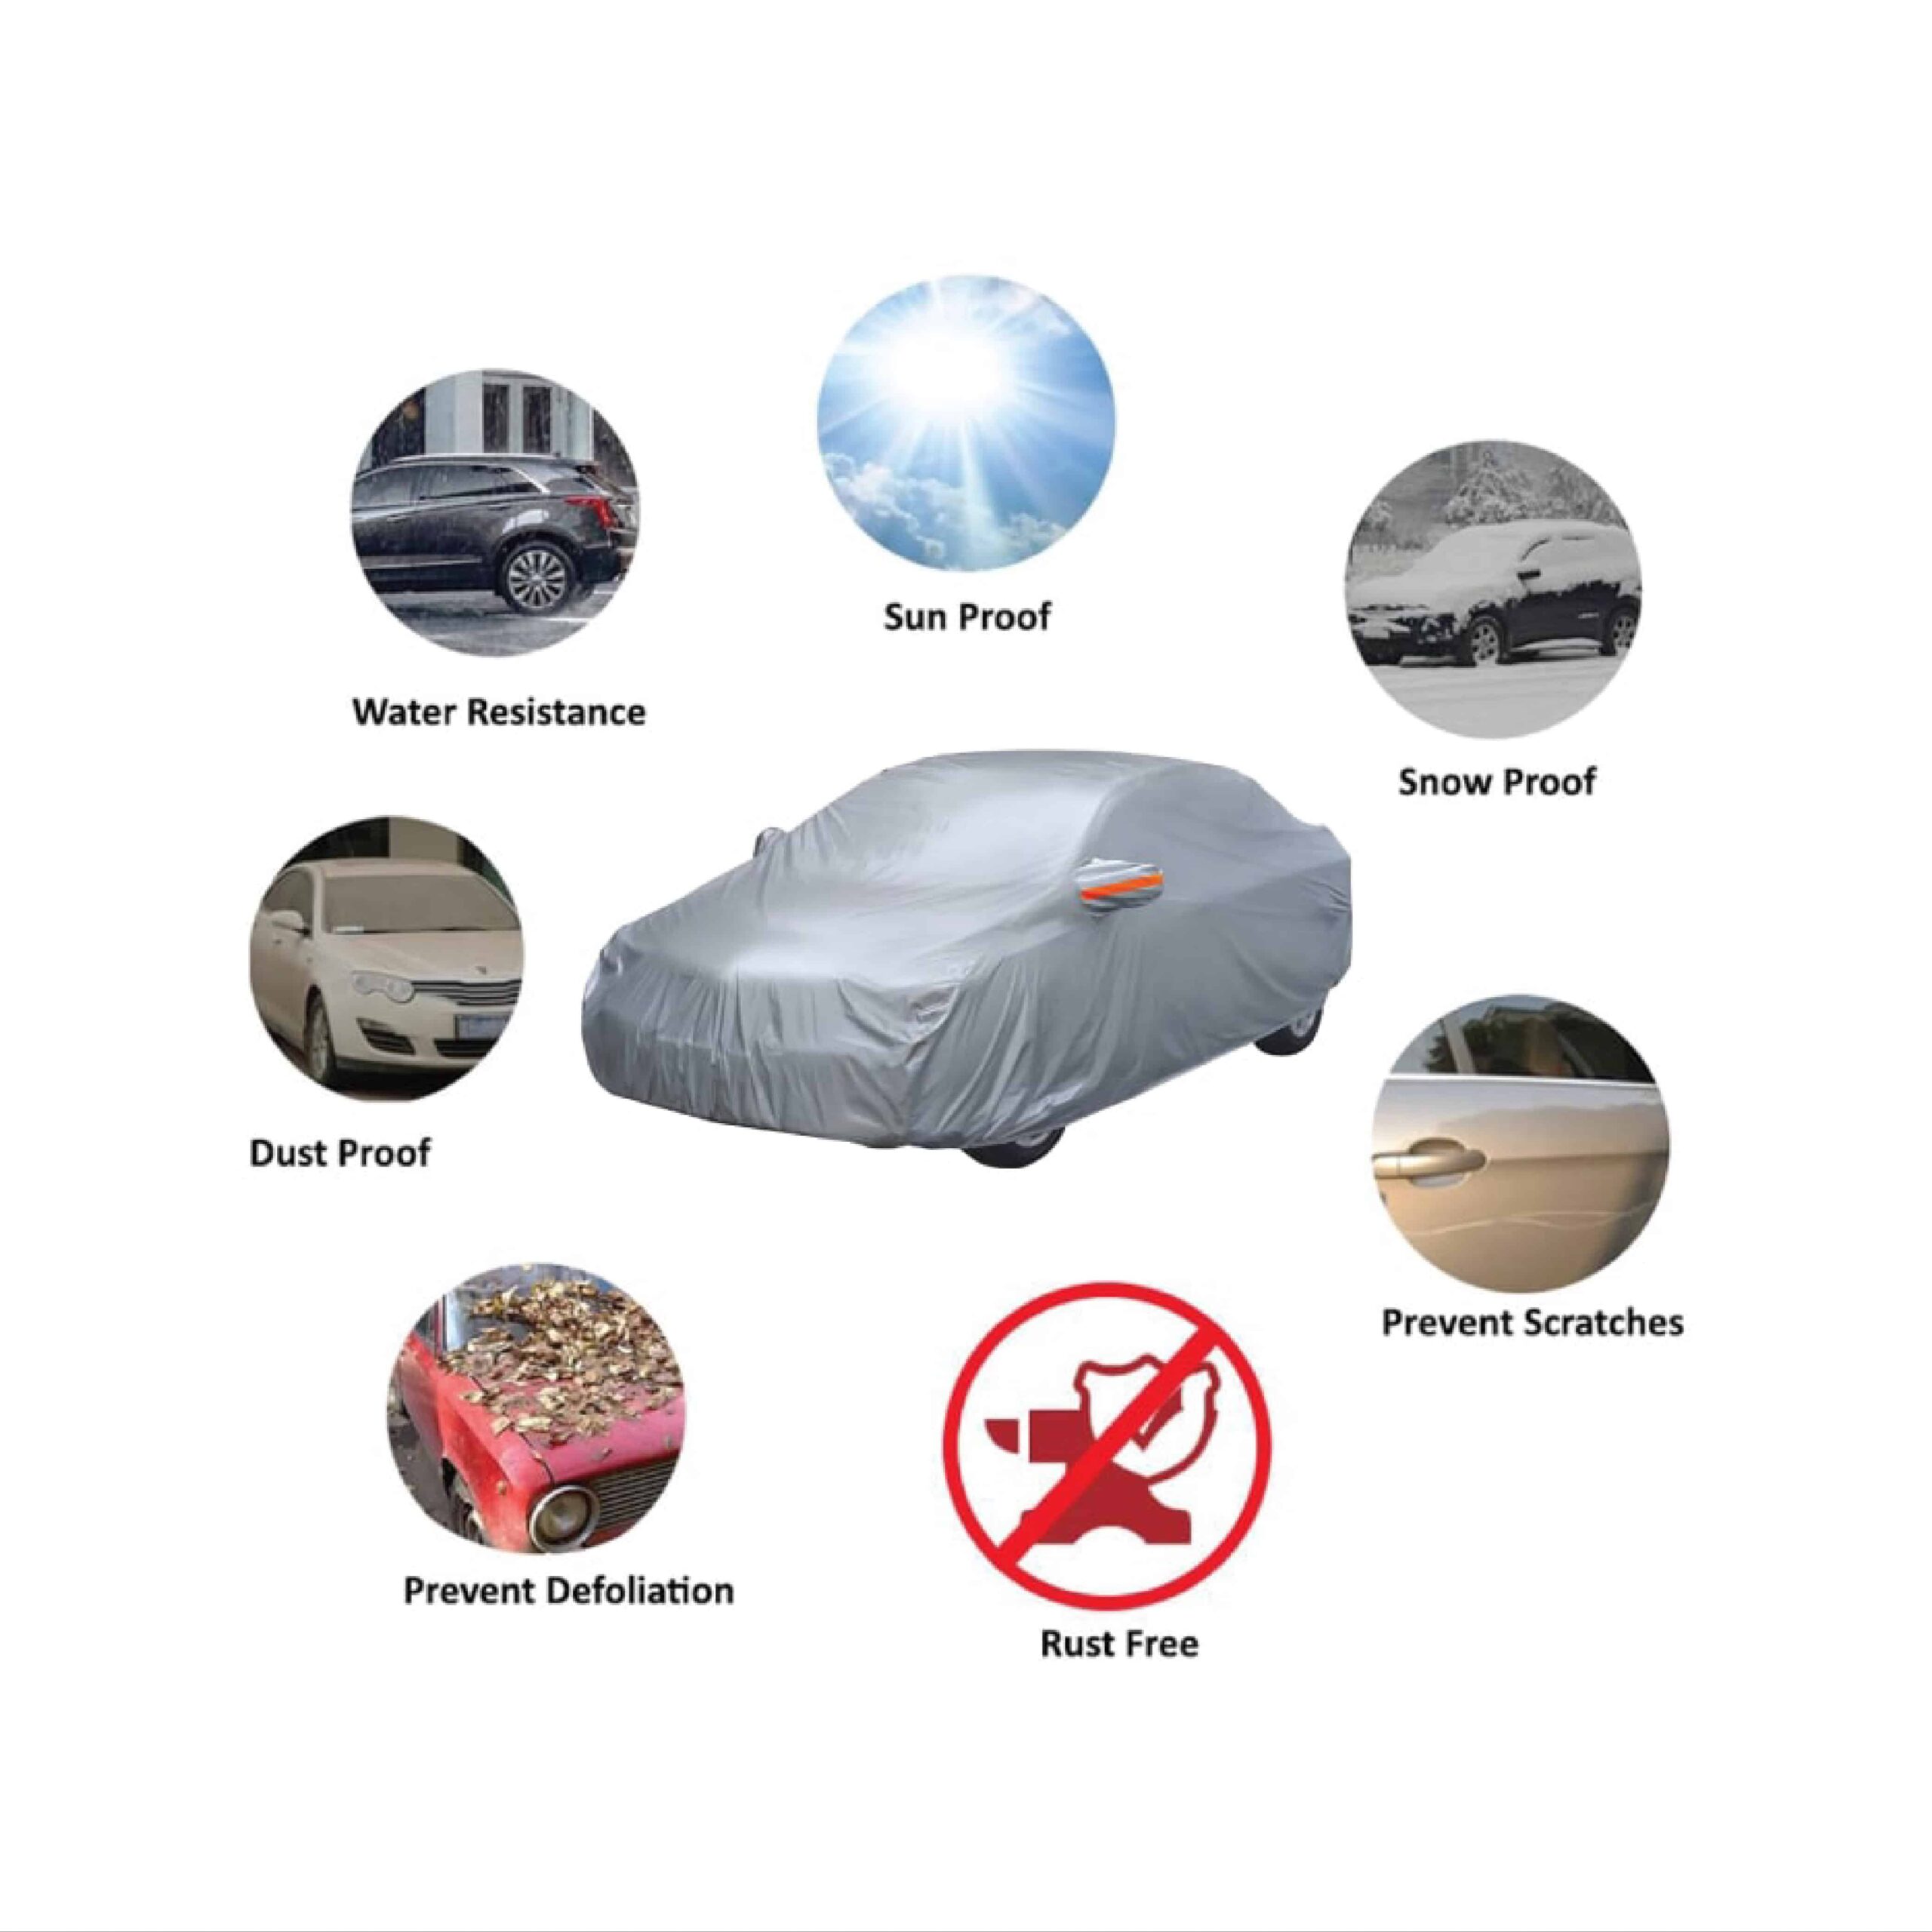 MyTVS CSK-7A Car Body Cover For Entry Level SUV